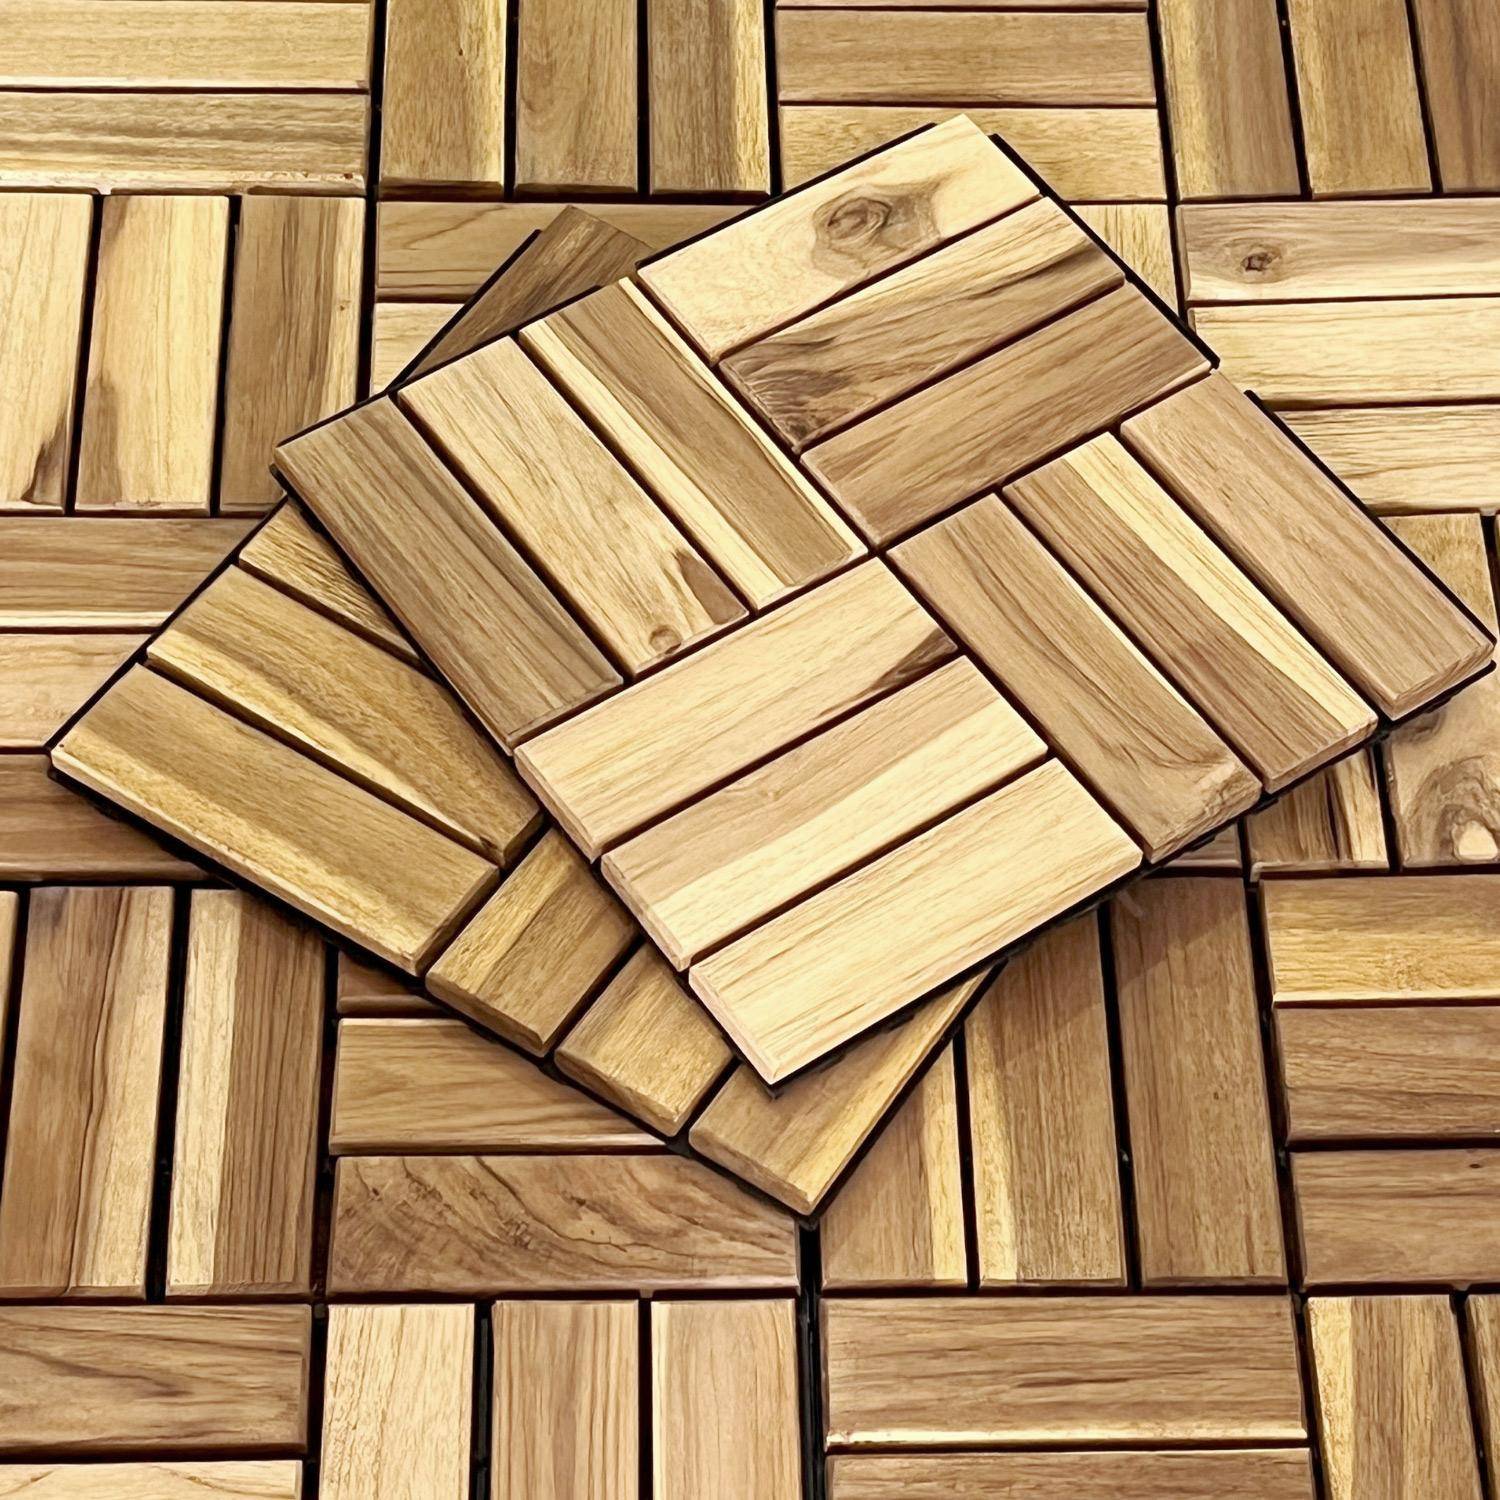 Pack of 10 acacia wood decking tiles 30x30cm, square pattern, clip-on,sweeek,Photo5